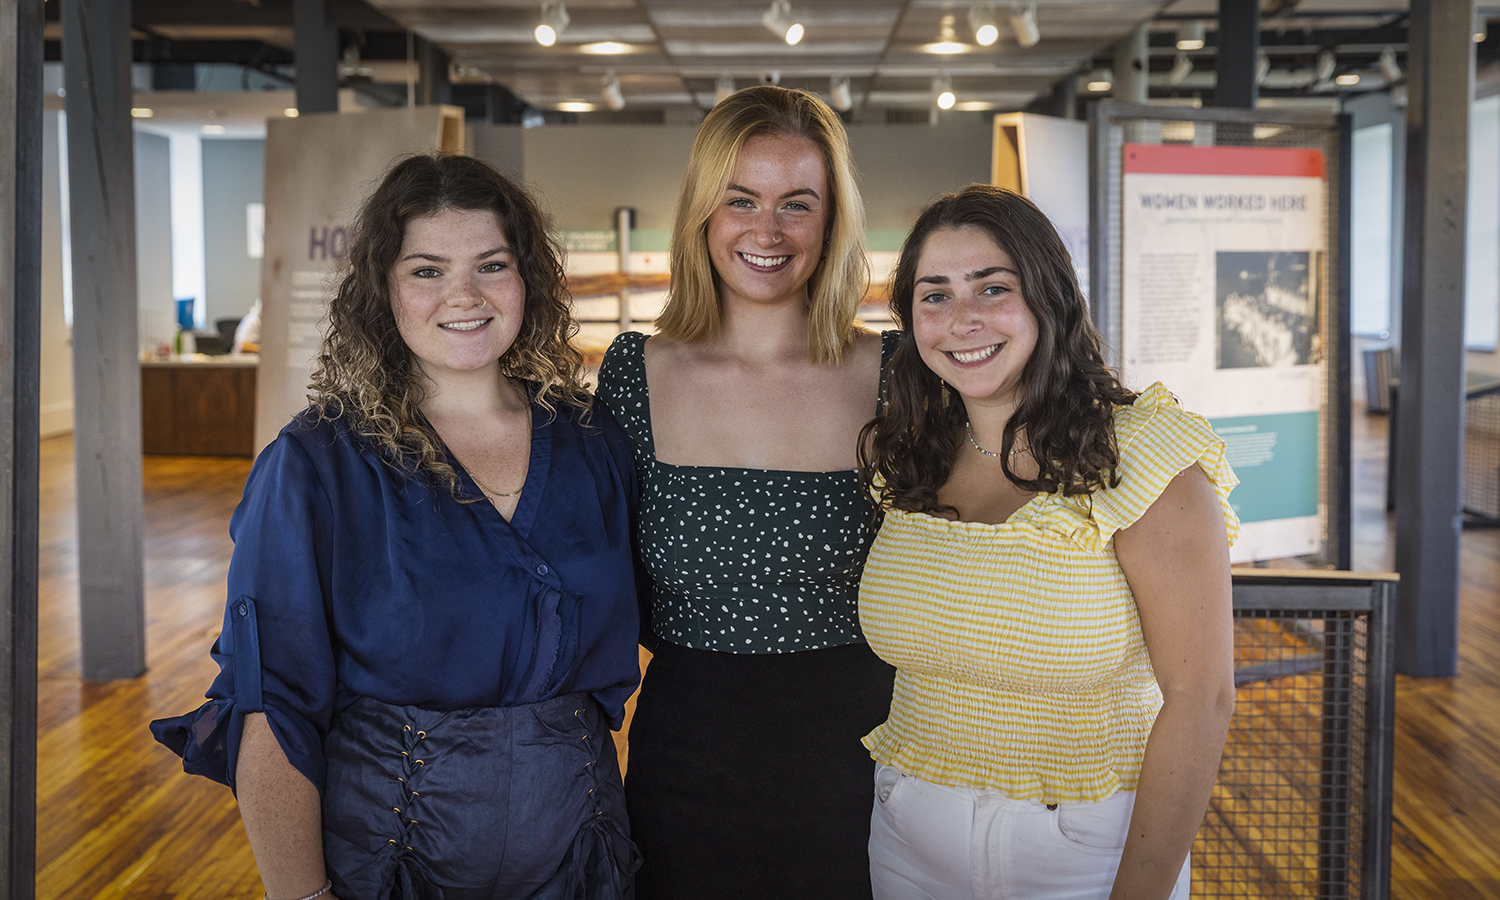 Hollie Harnas ‘23, Lauren Earley '23 and Emily Kahn ‘23 work this summer at the National Women's Hall of Fame in Seneca Falls, N.Y.